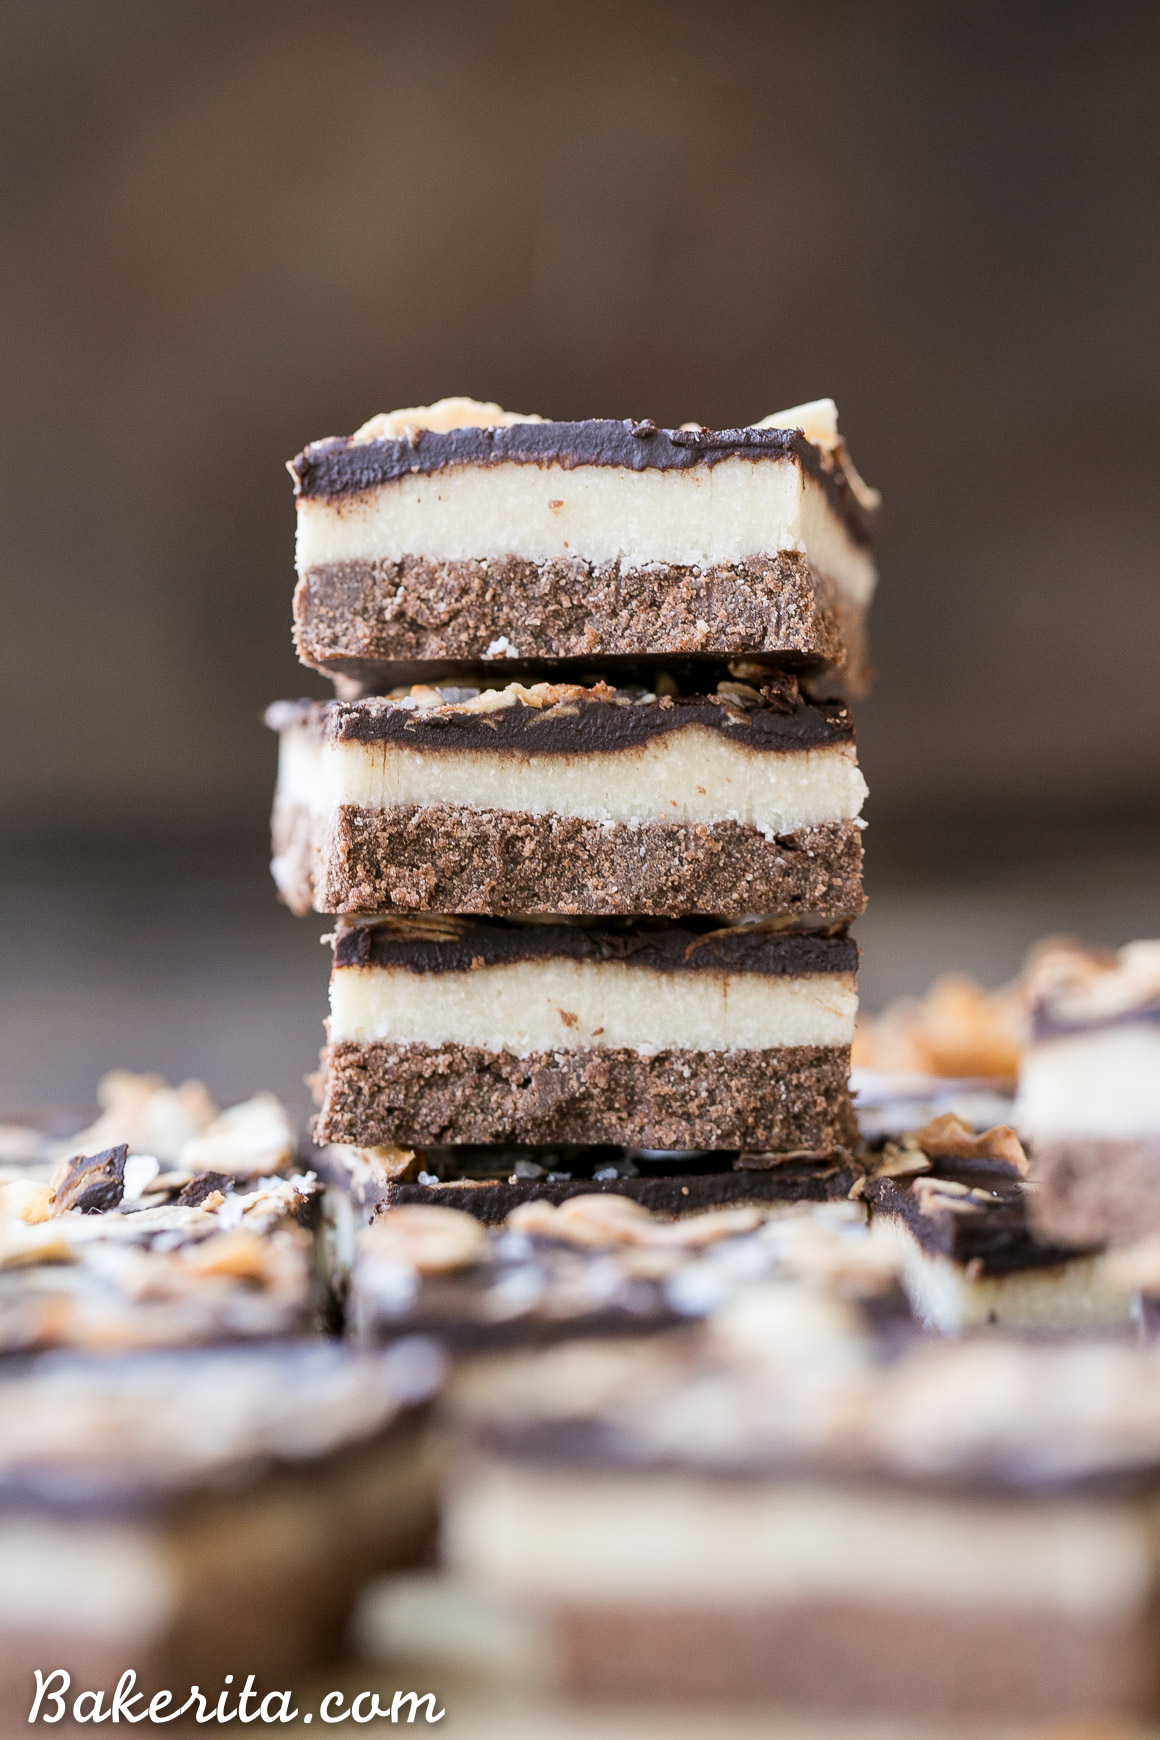 These Chocolate Coconut Bars have three irresistible layers - a chocolate shortbread crust, a melt-in-your-mouth coconut butter filling, and a chocolate topping with toasted coconut! Any coconut lover is going to love these gluten-free, Paleo + vegan dessert bars.